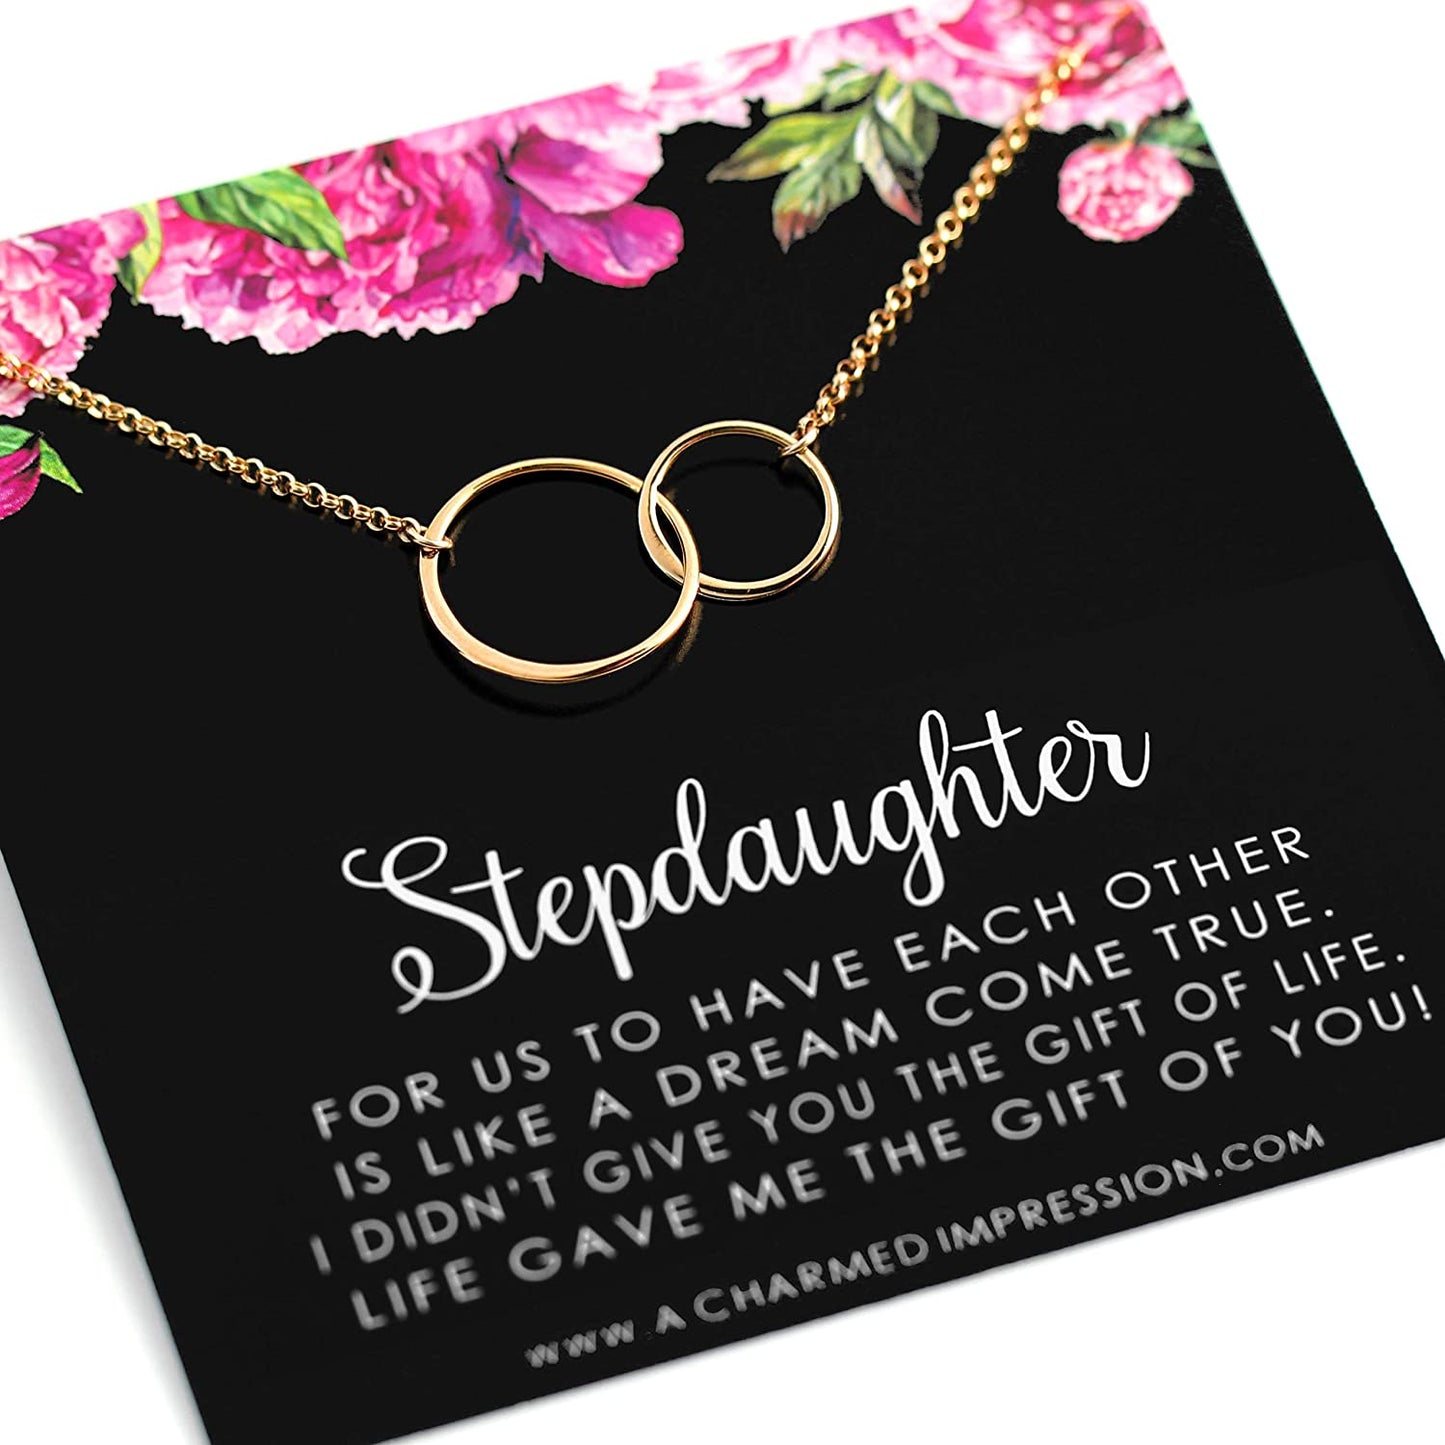 Stepdaughter Gifts from Stepmom Stepdad • Daughter Gift • Meaningful Jewelry for Women Girls • Mother Father to Stepdaughter Necklace • Bride Bridal Shower Wedding • 14k Gold Necklace